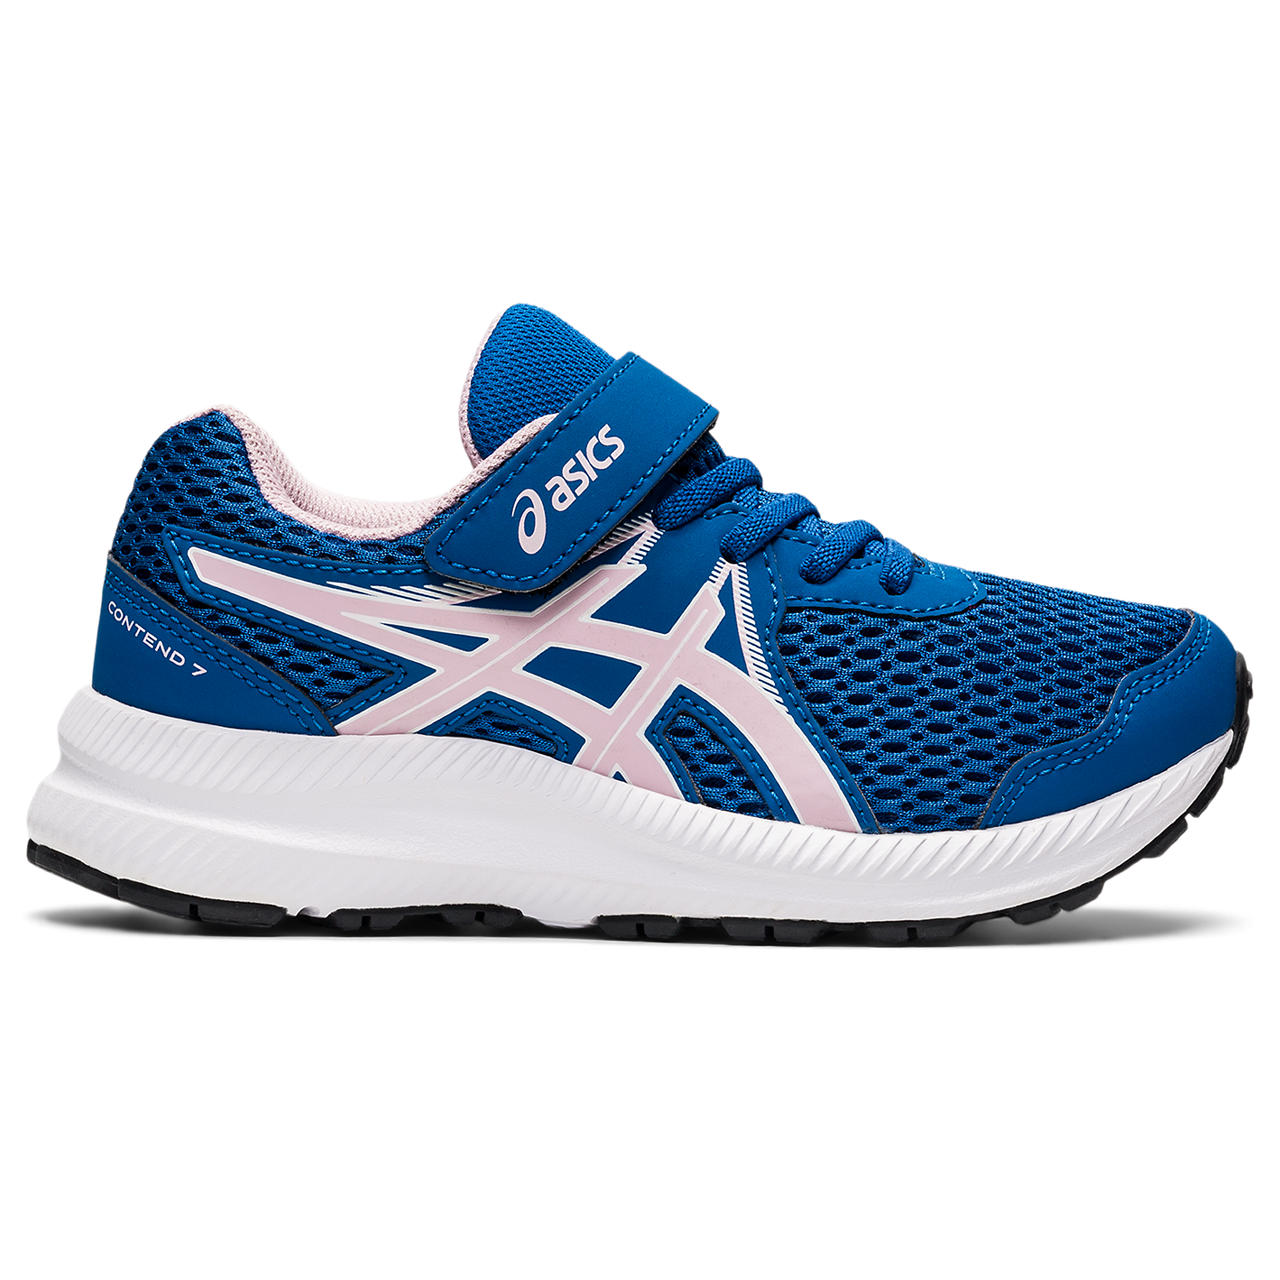 ASICS CONTEND 7 PS, LAKE DRIVE/BARELY ROSE, swatch